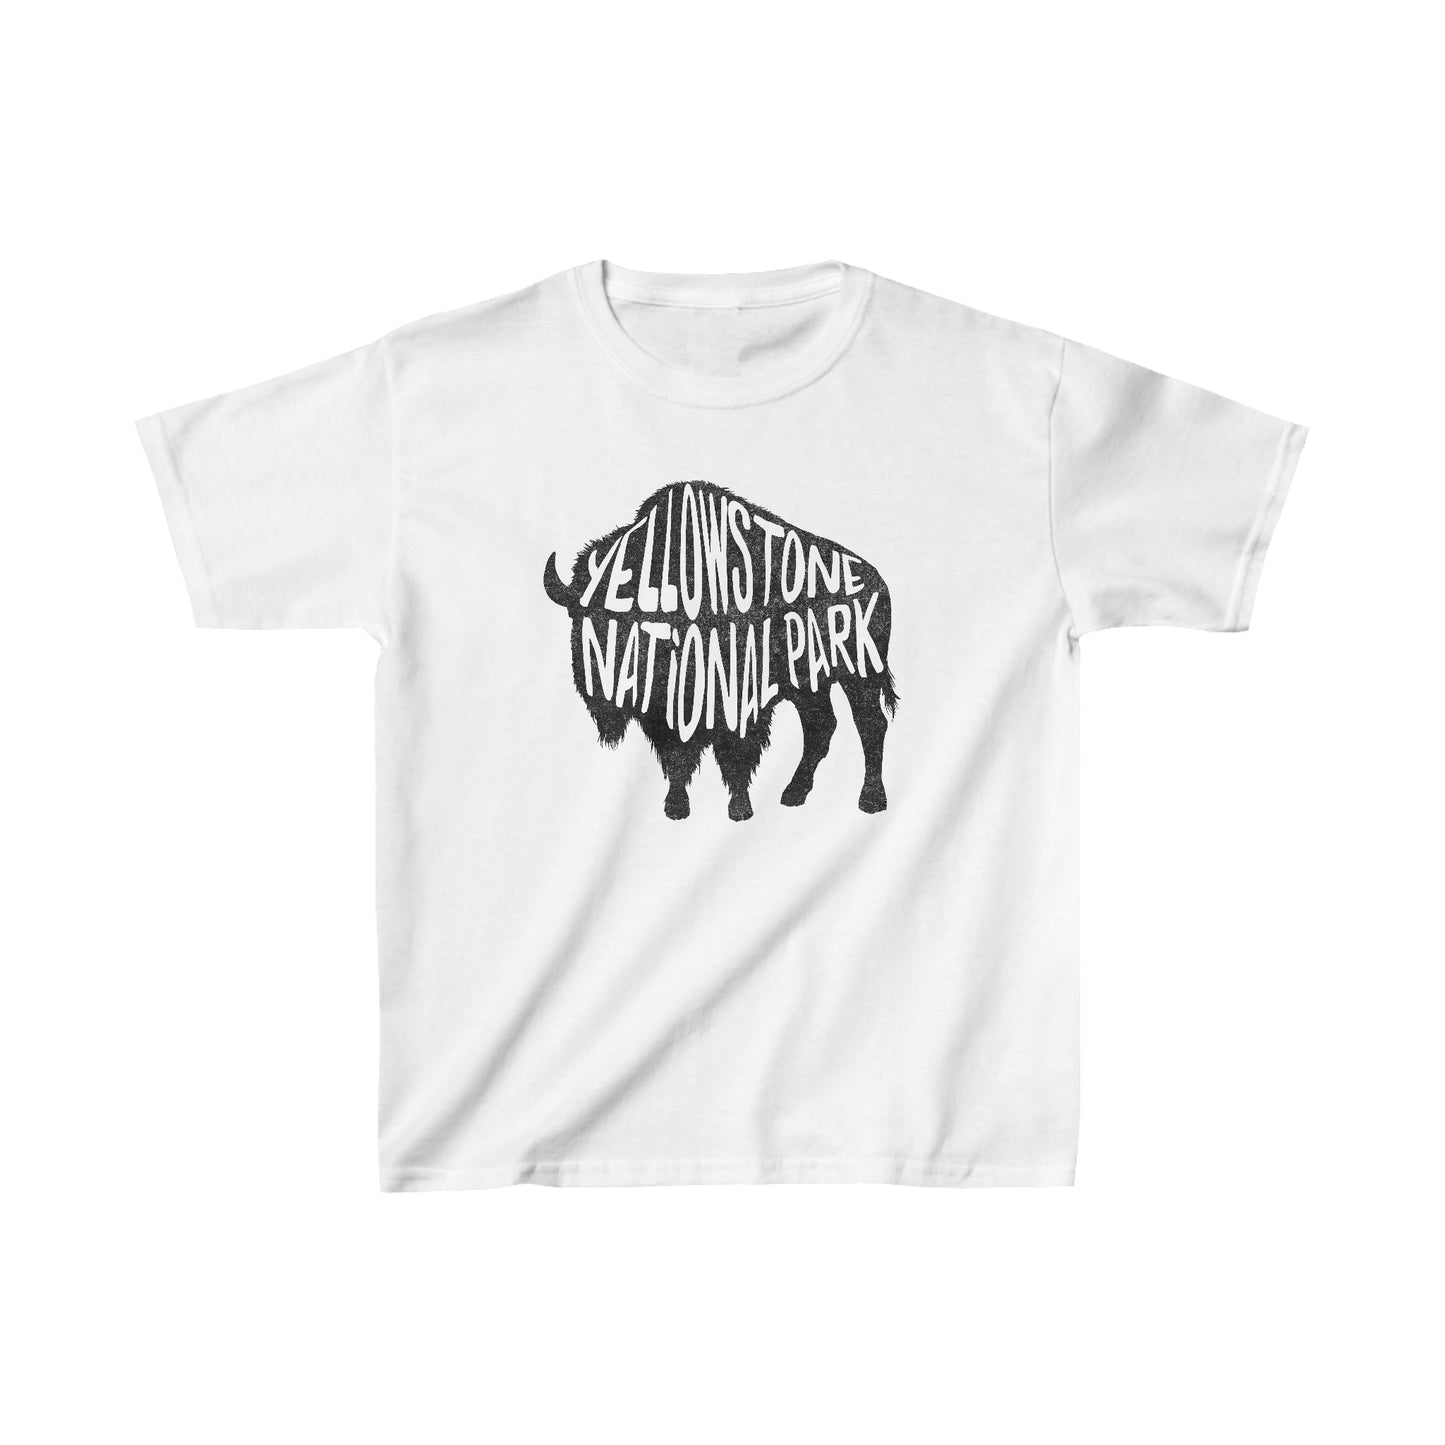 Yellowstone National Park Child T-Shirt - Bison Chunky Text